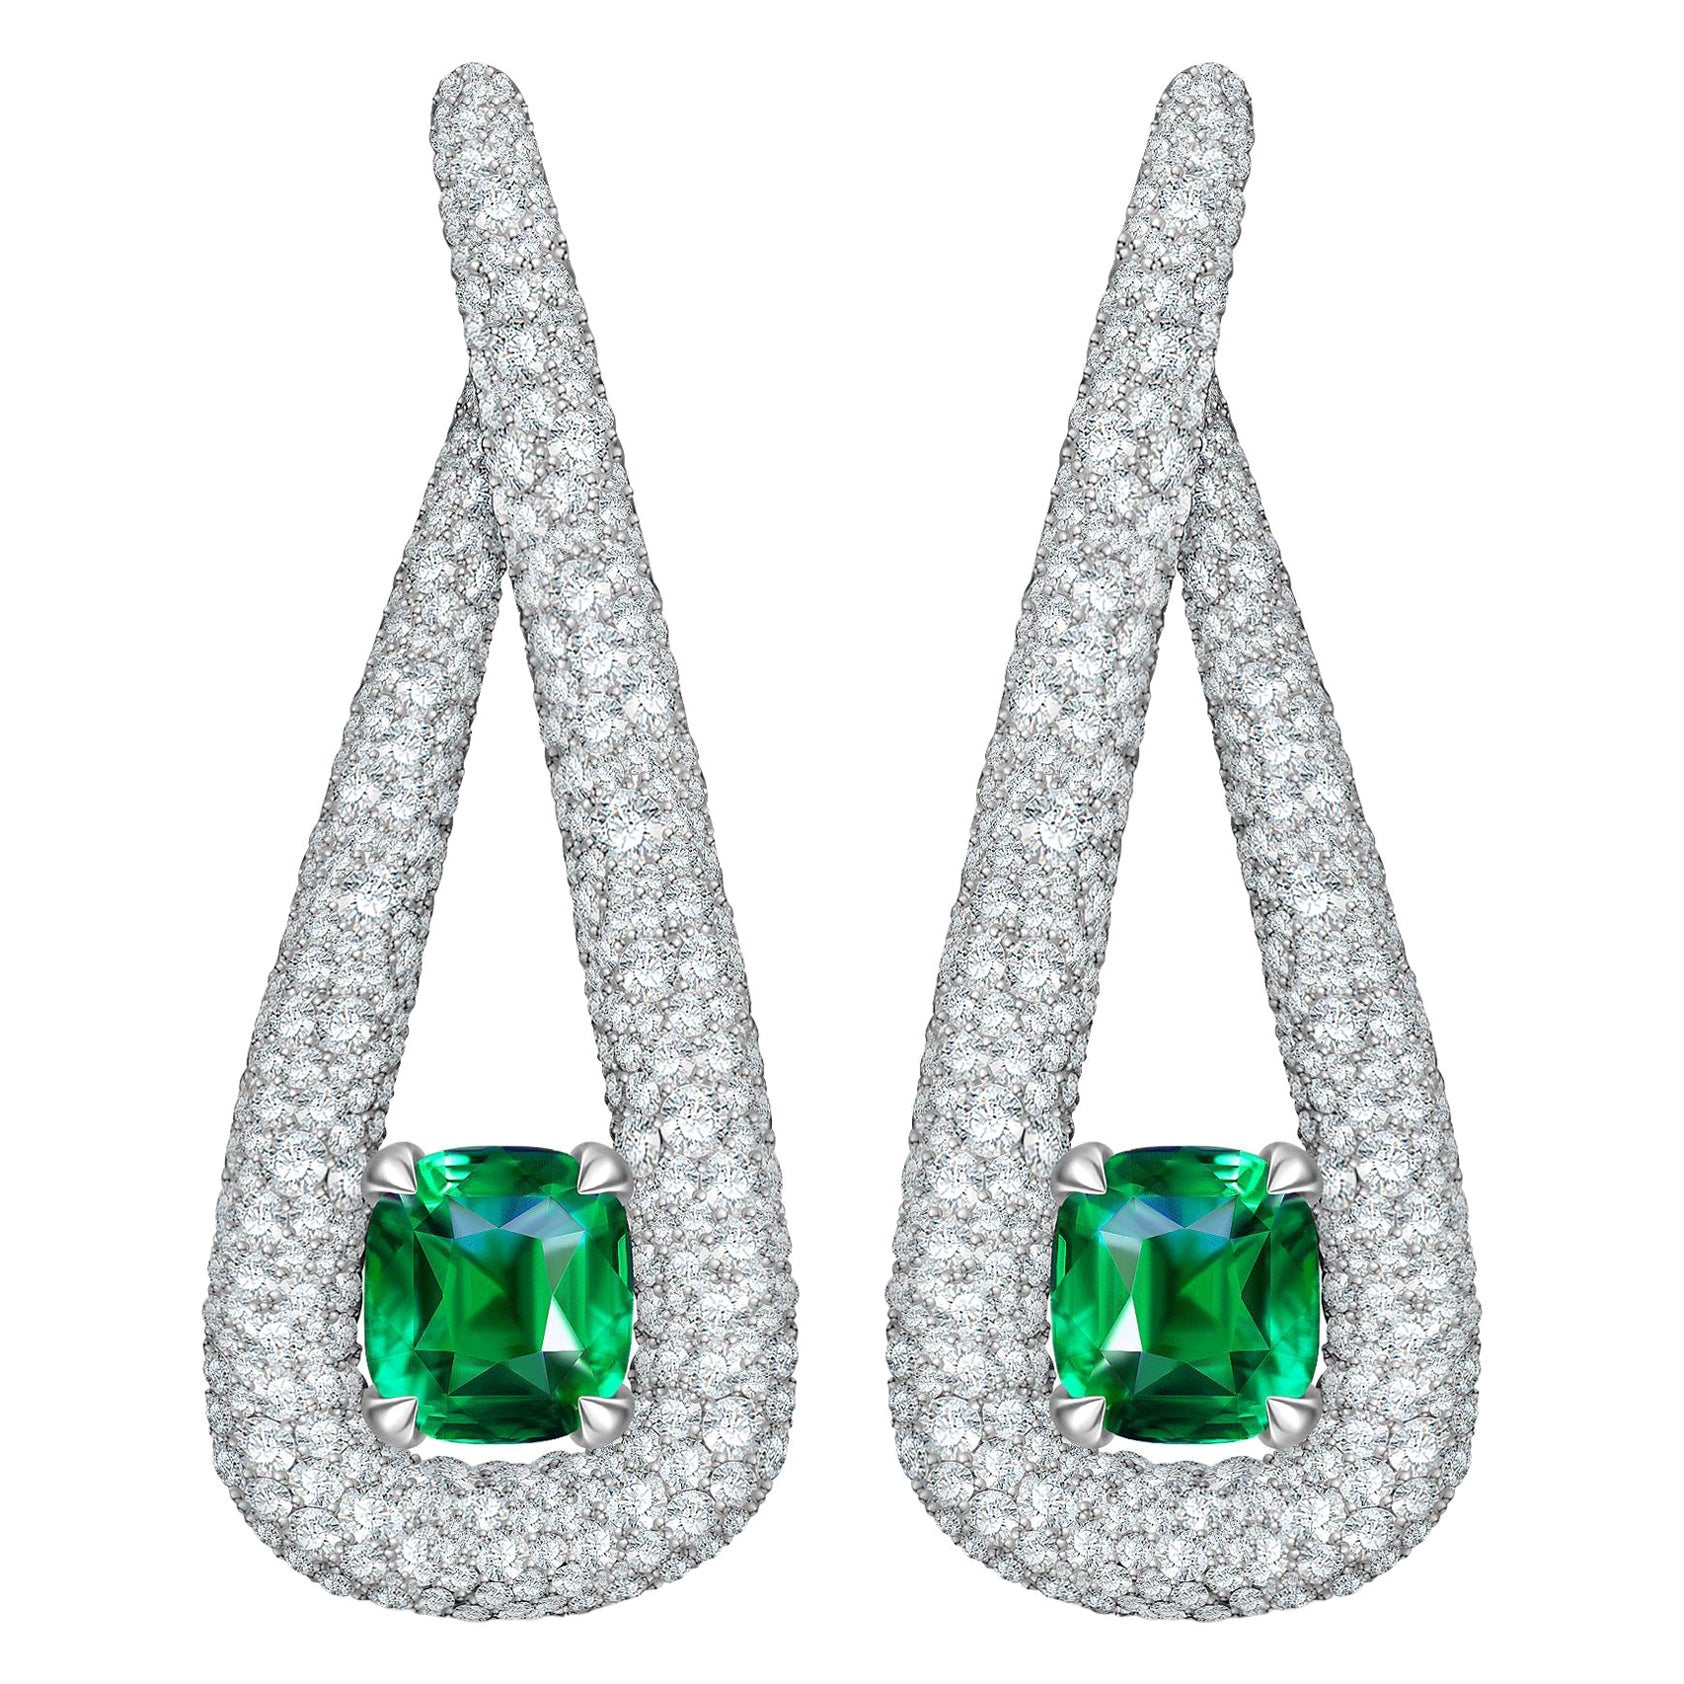 7.04 Carat Natural Emerald Diamonds 18 Karat White Gold Earrings by D&a For Sale